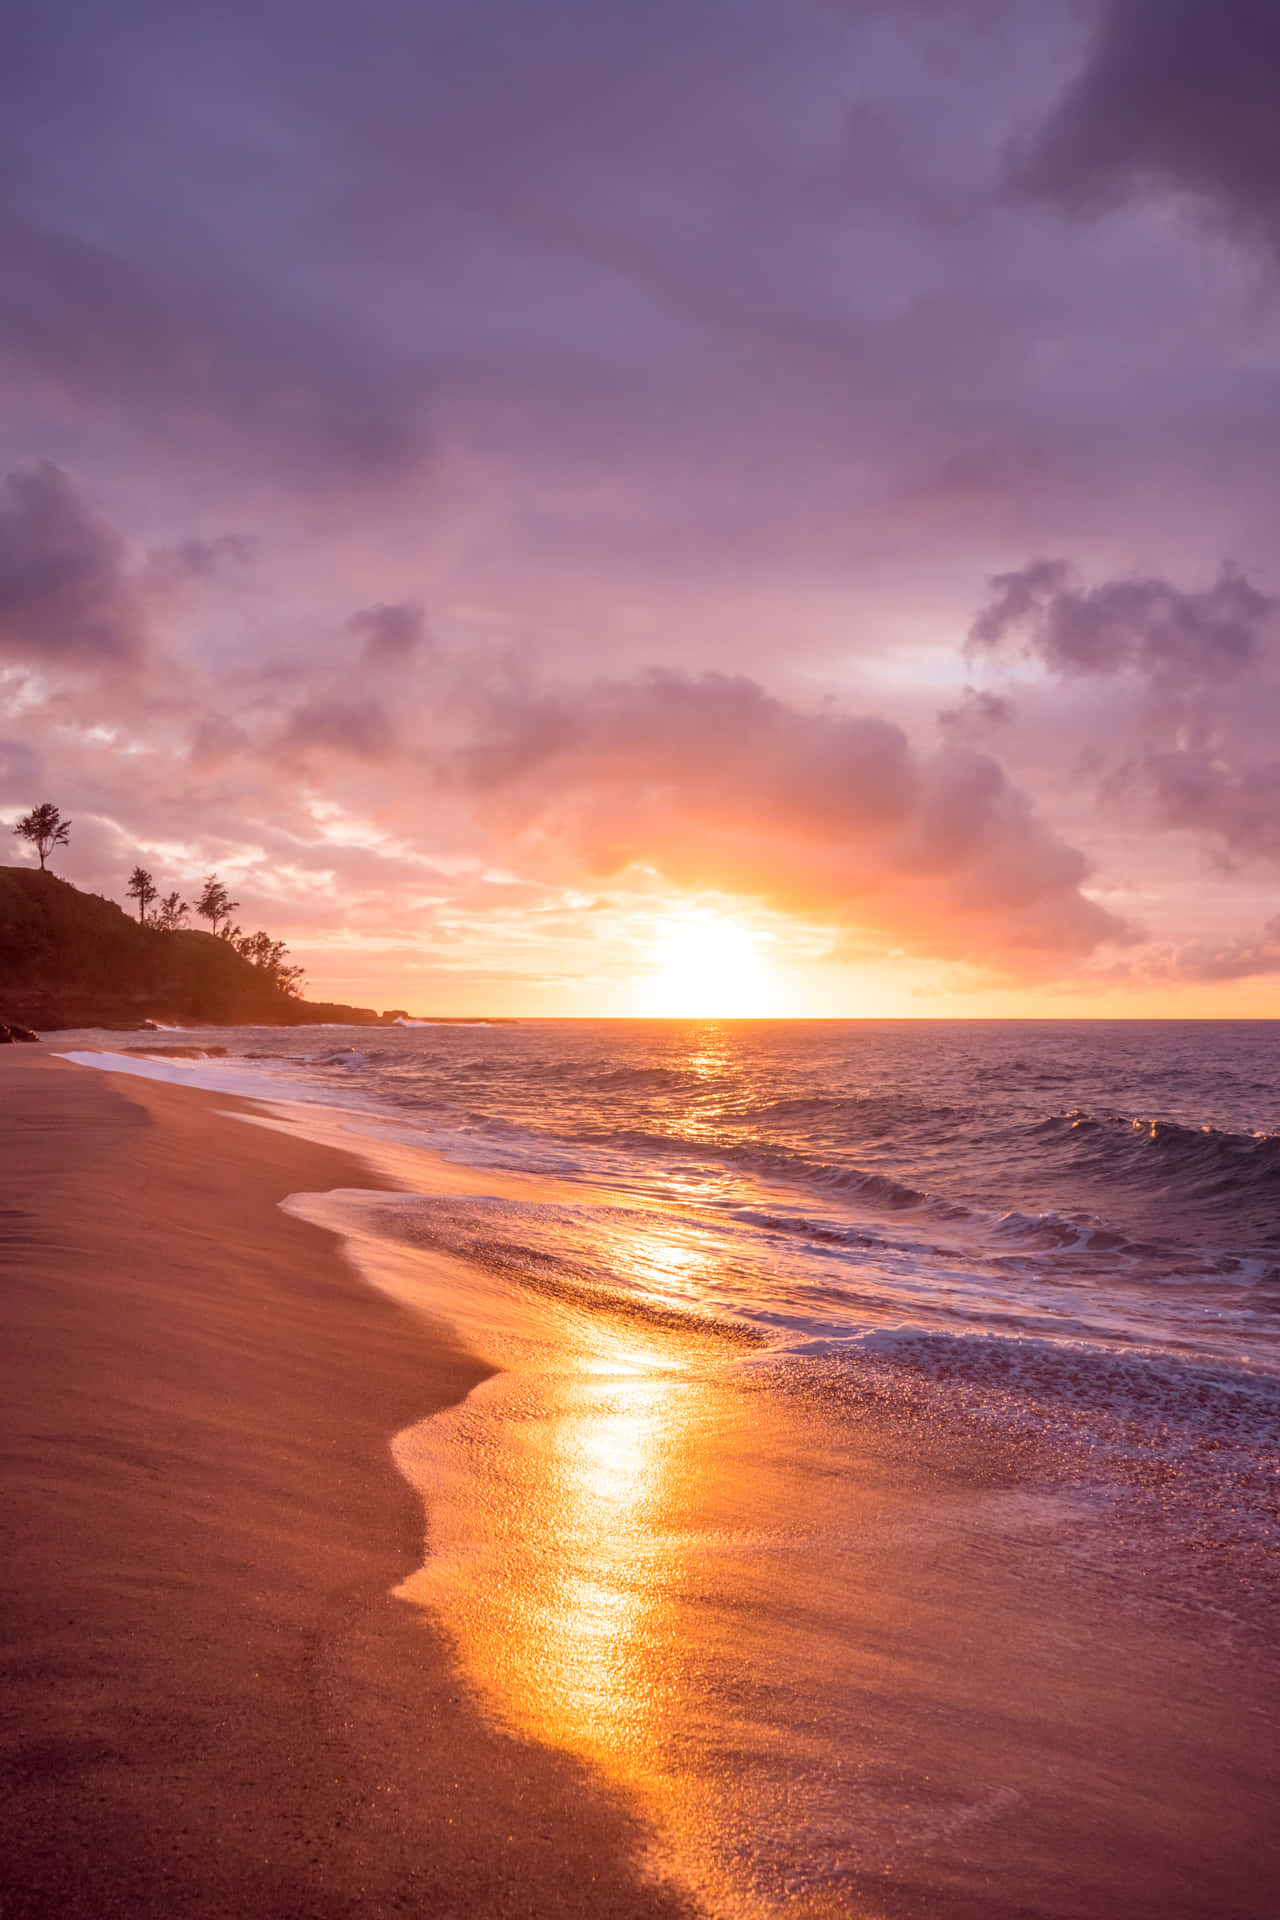 "A scenic view of Hawaii in sunset glow" Wallpaper